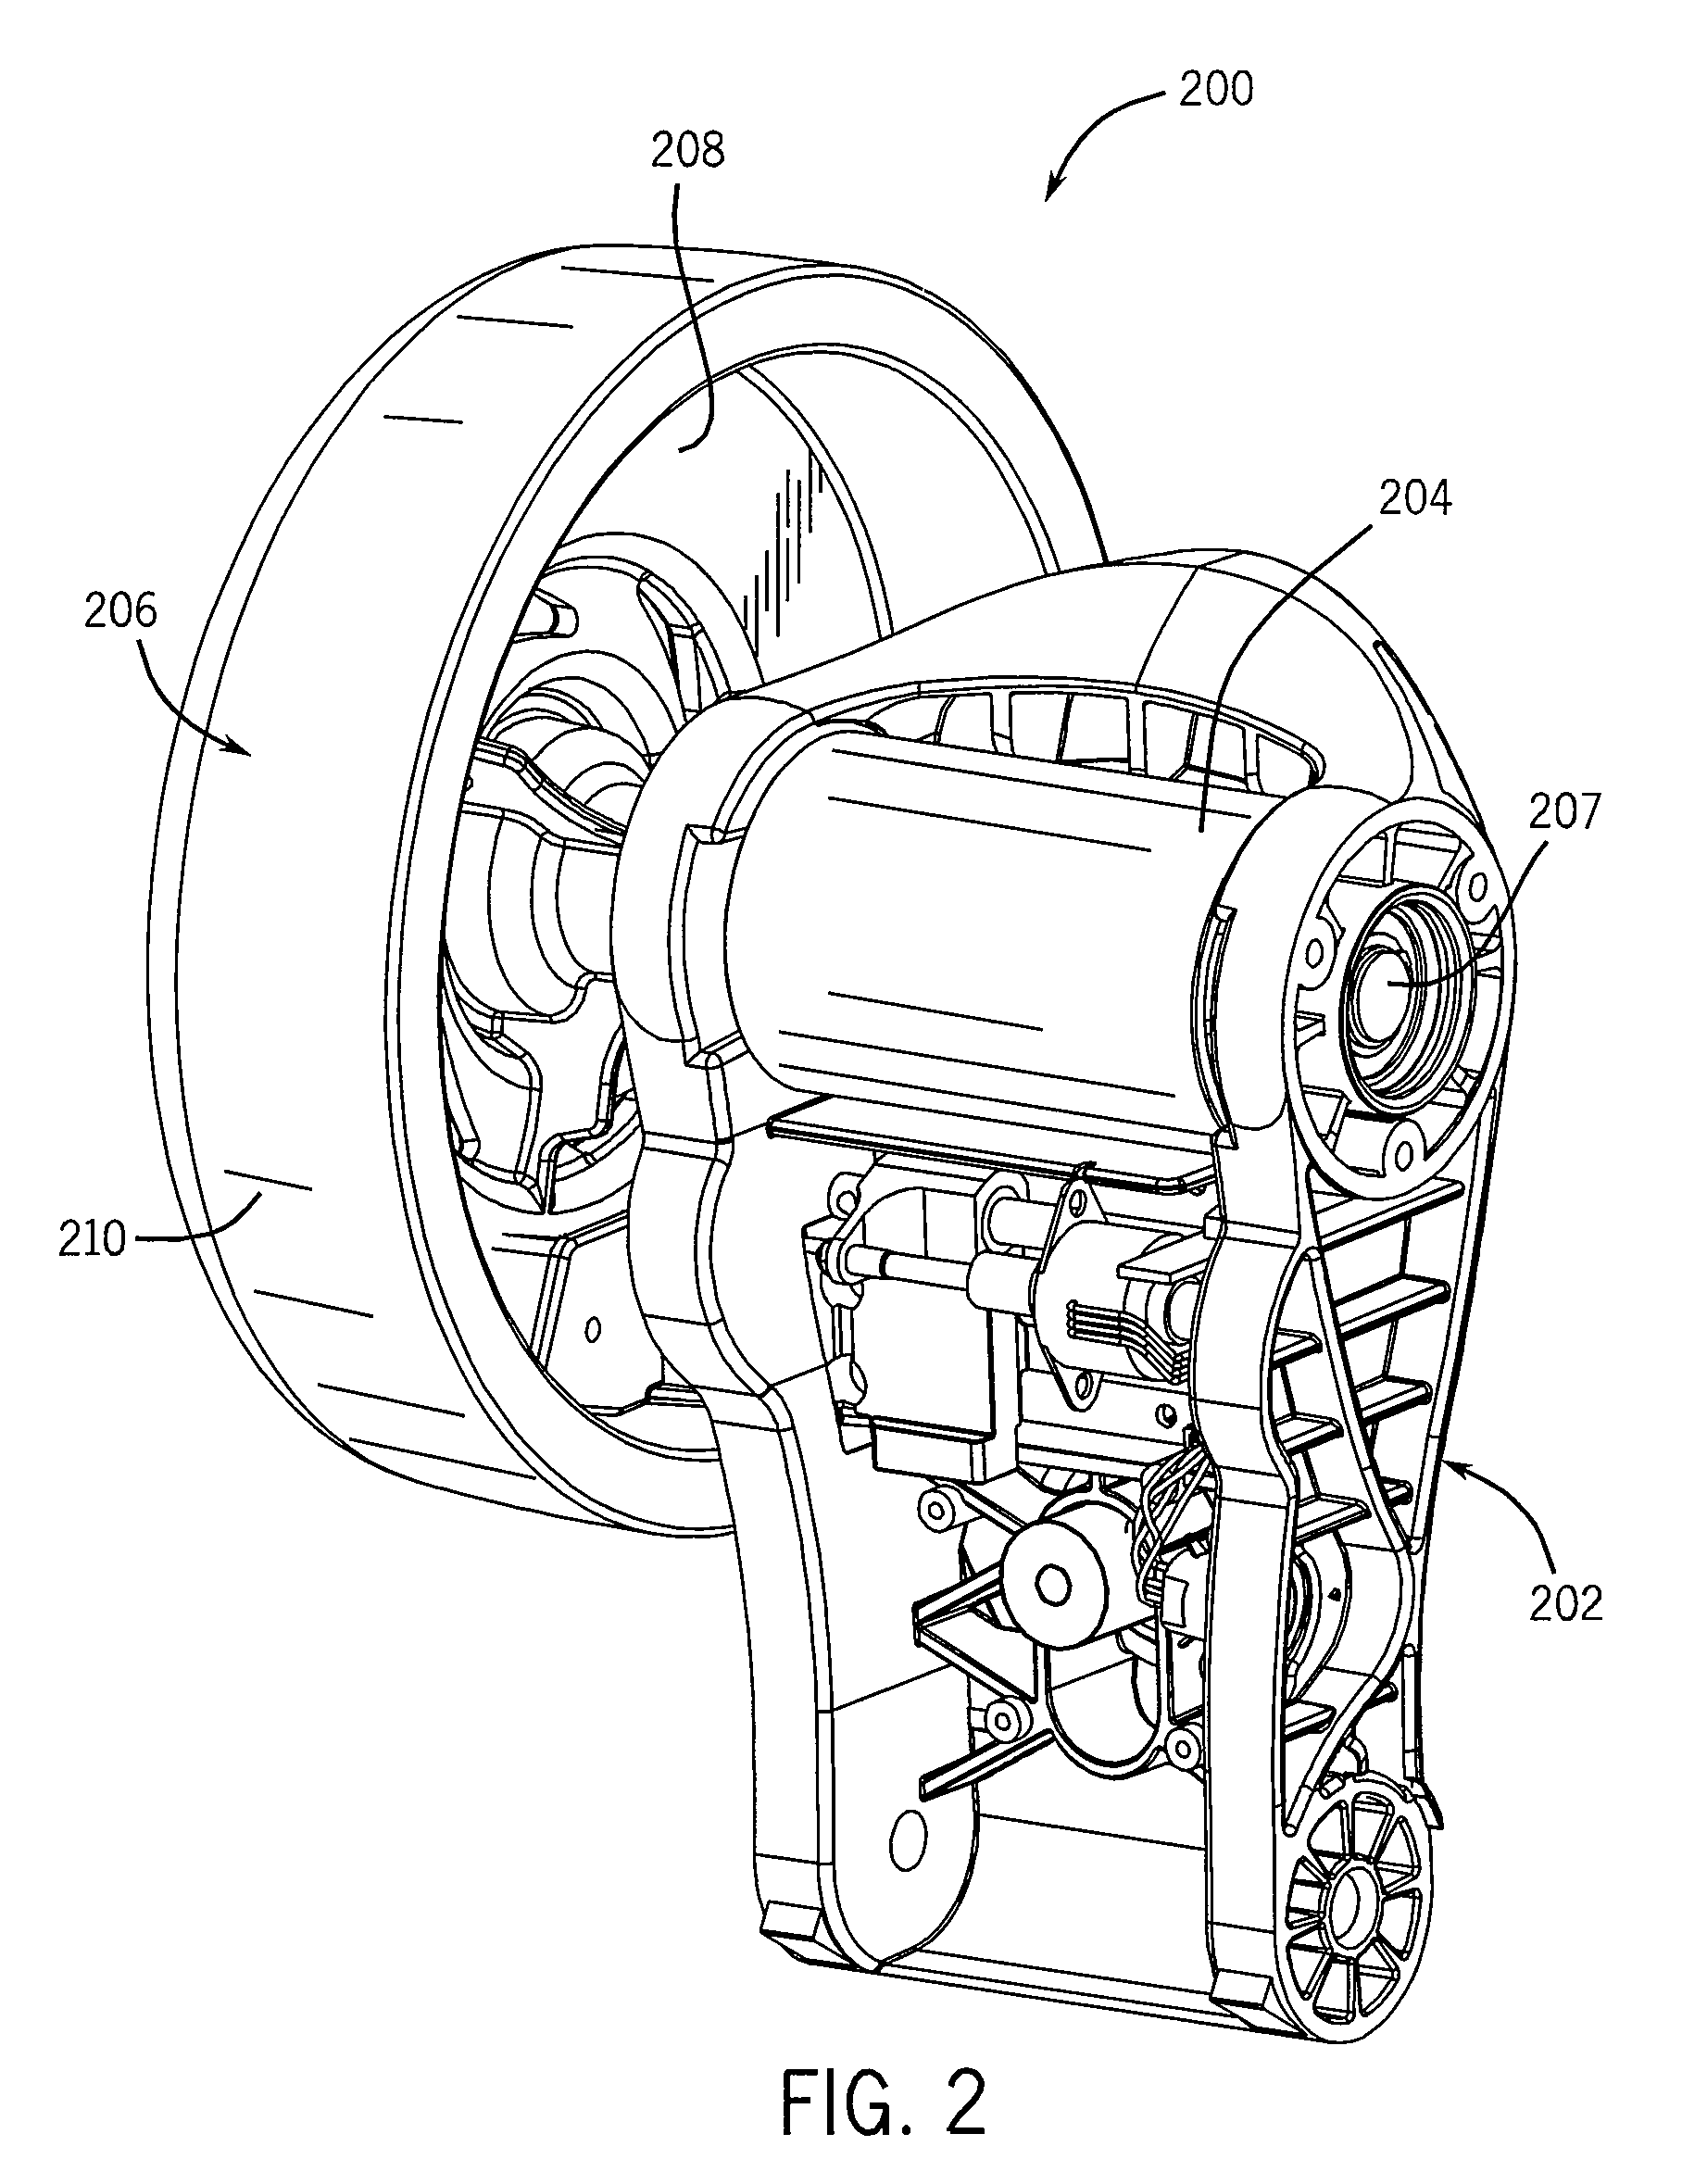 Power Sensing Eddy Current Resistance Unit For An Exercise Device